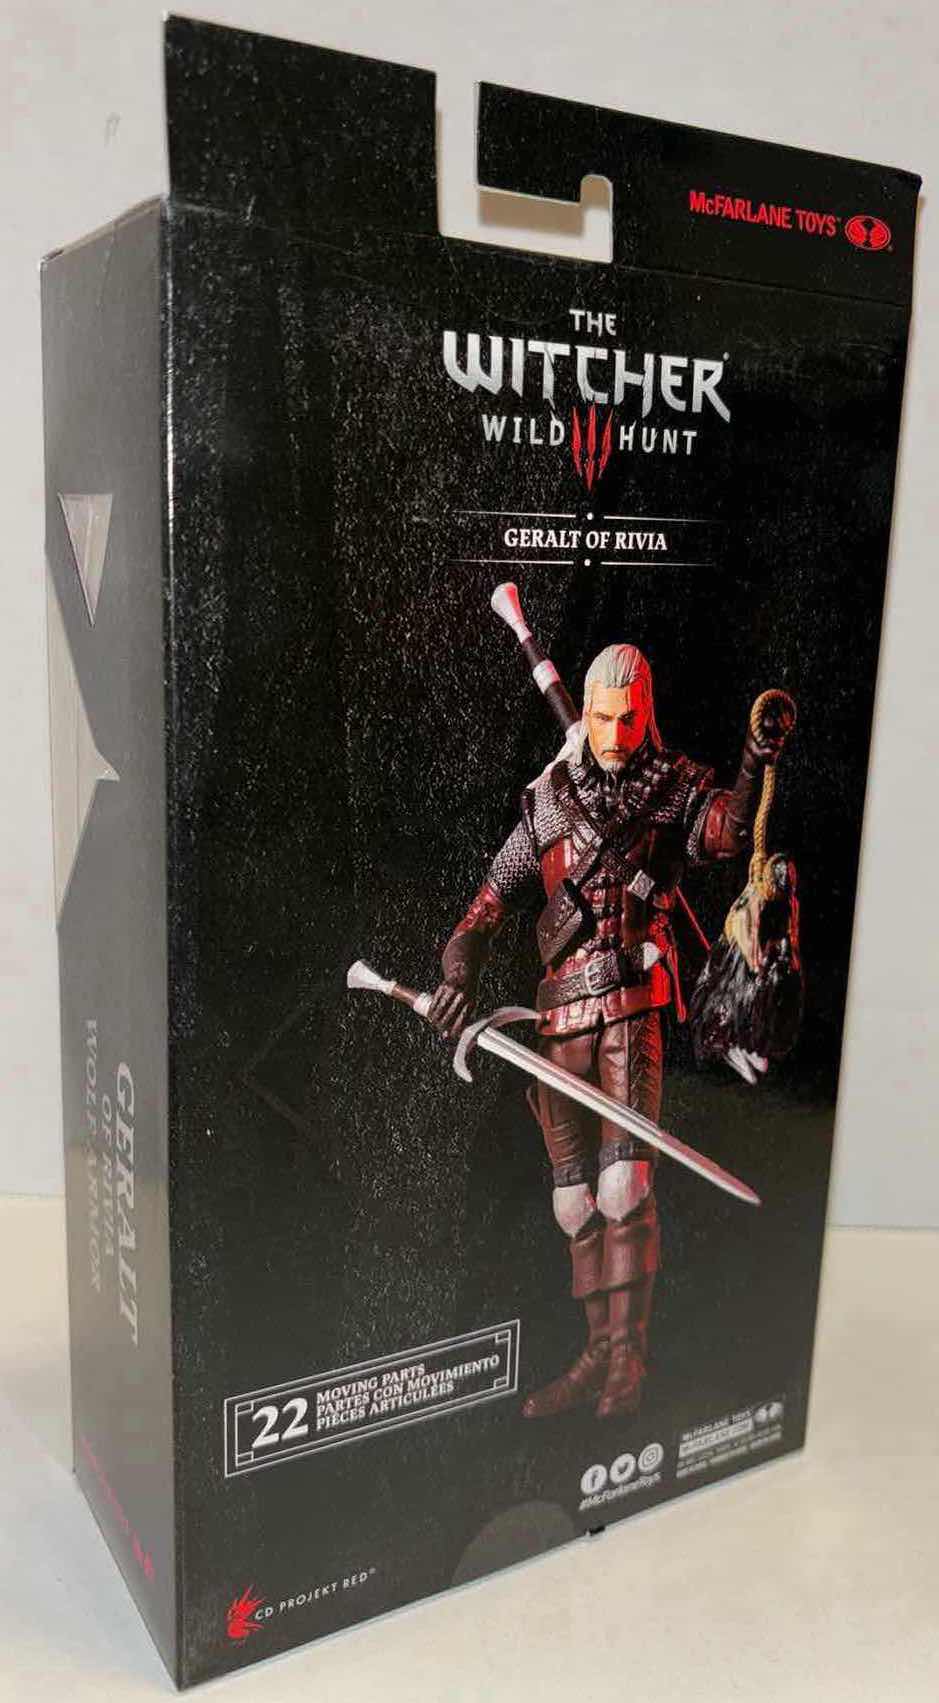 Photo 4 of NEW MCFARLANE TOYS THE WITCHER WILD HUNT 2-PACK “GERALT OF RIVIA” ACTION FIGURE & ACCESSORIES